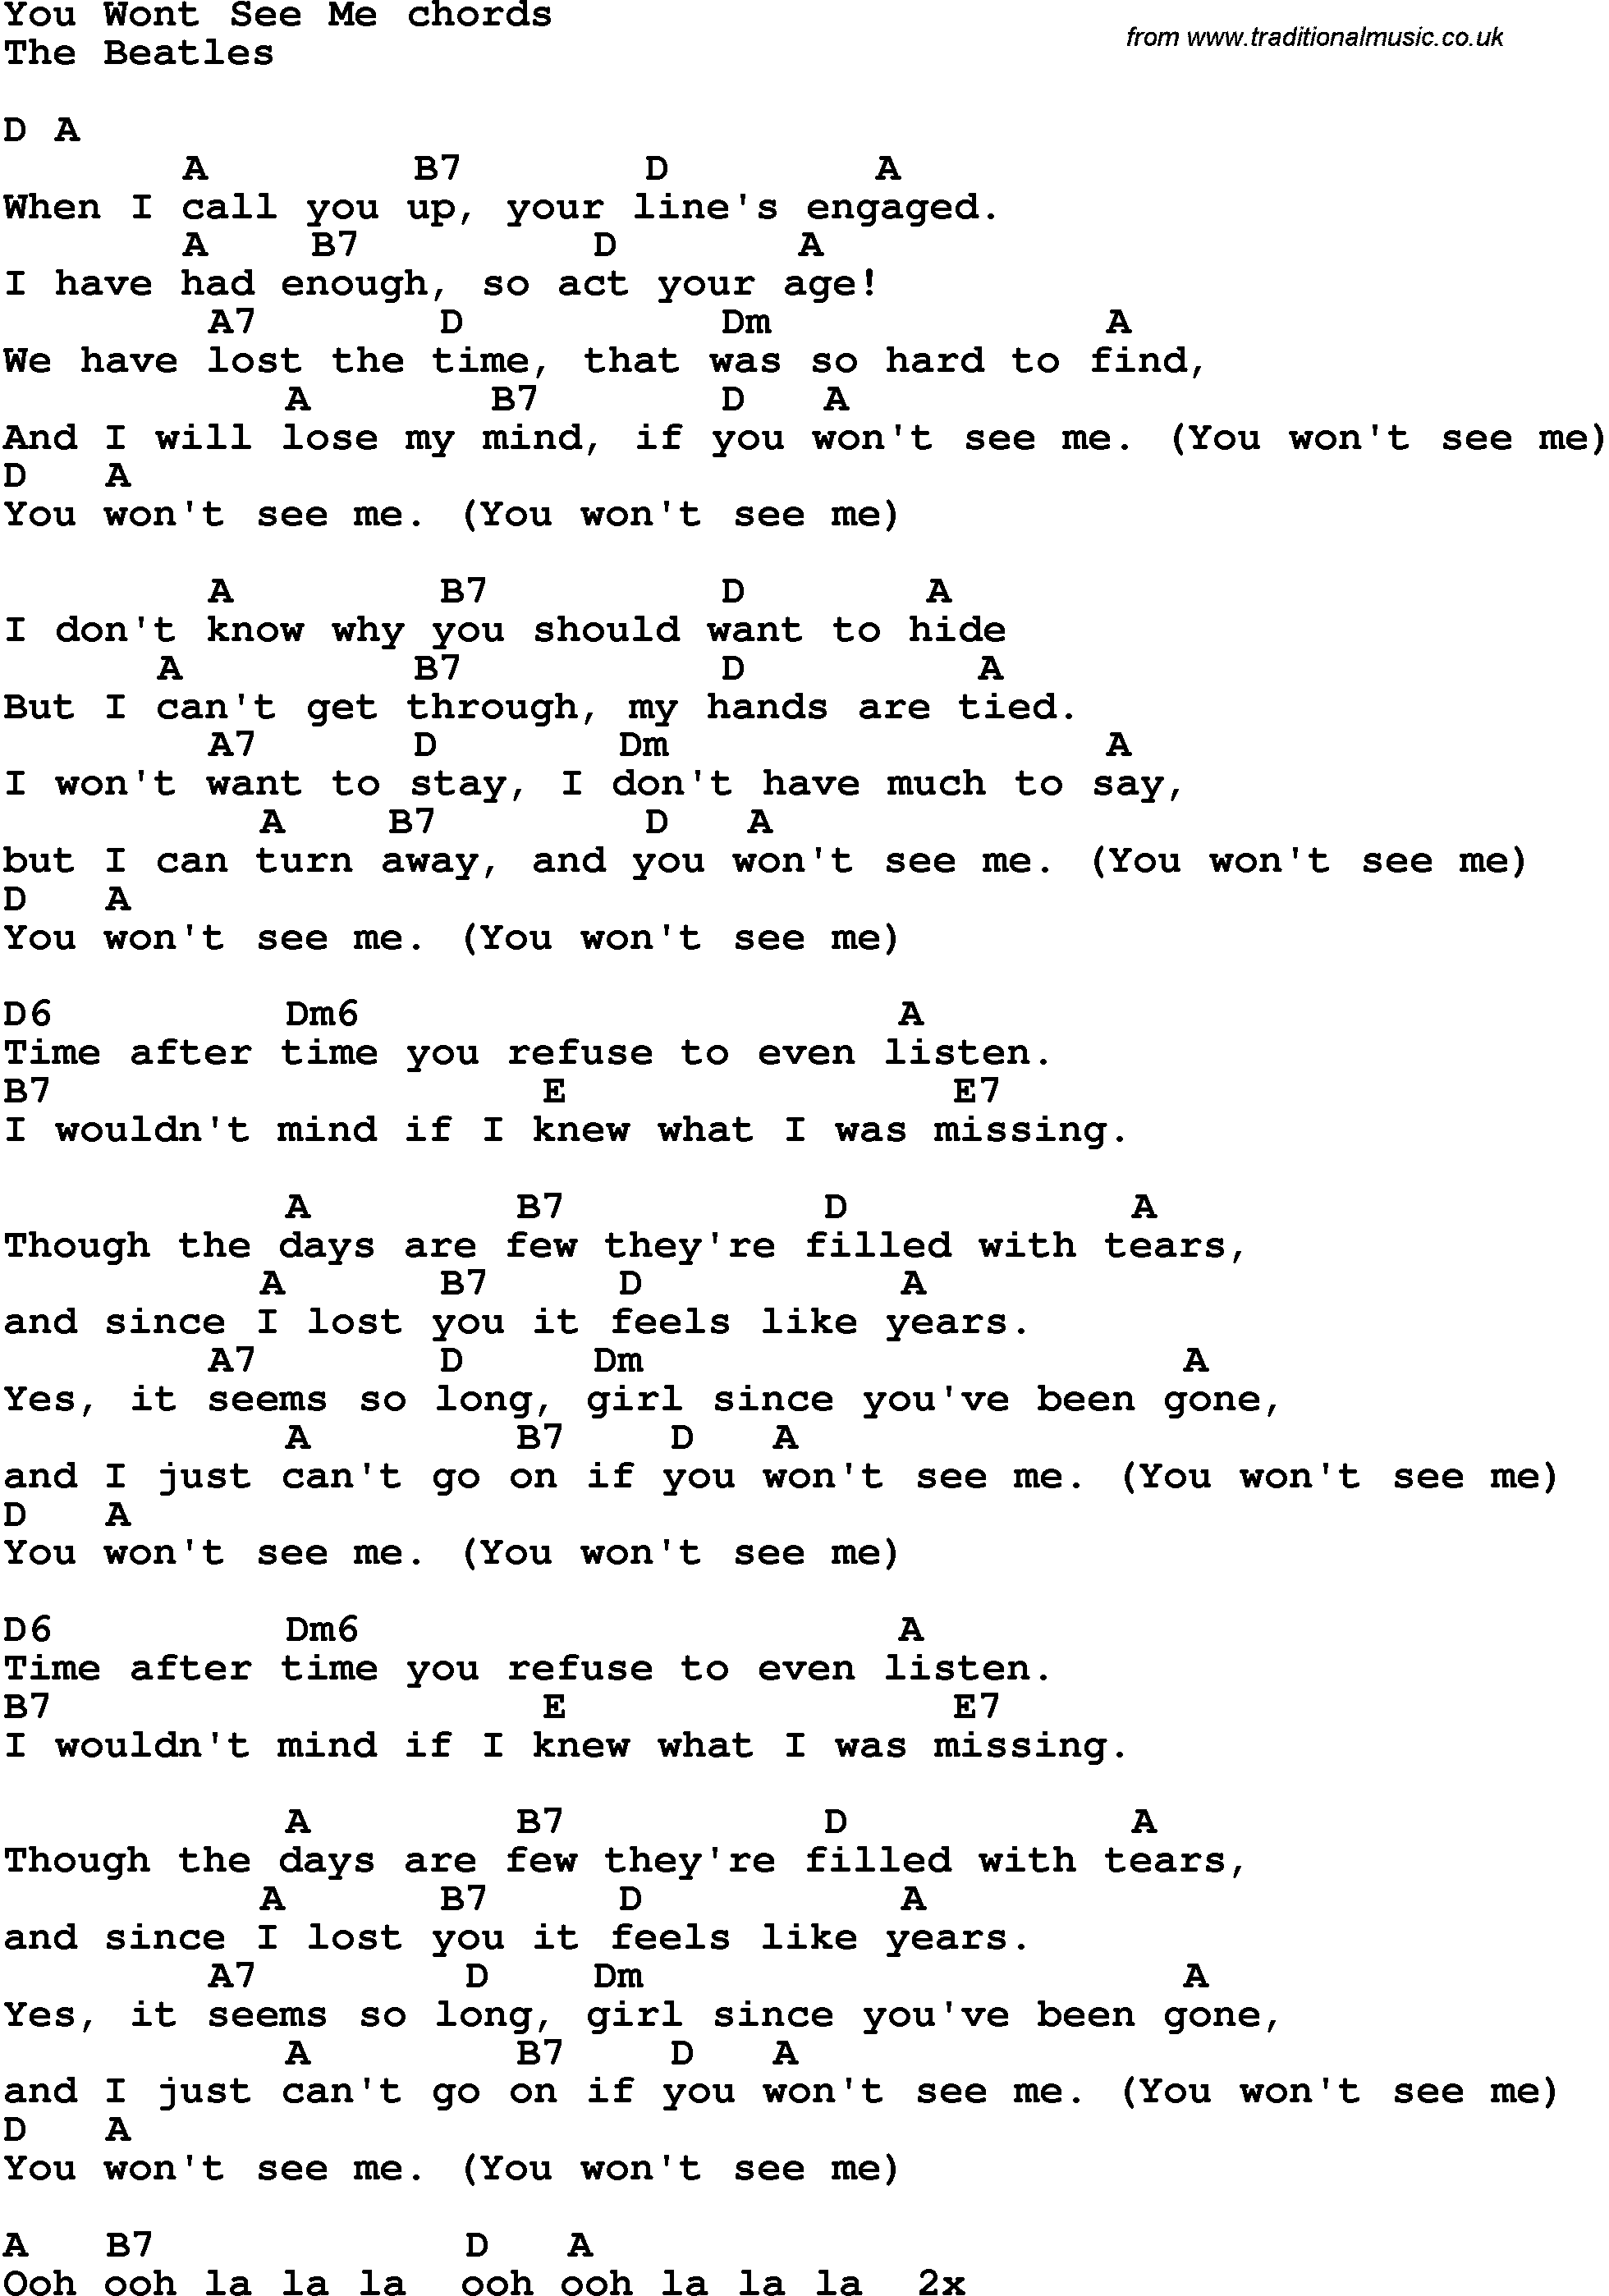 Song Lyrics with guitar chords for You Won't See Me